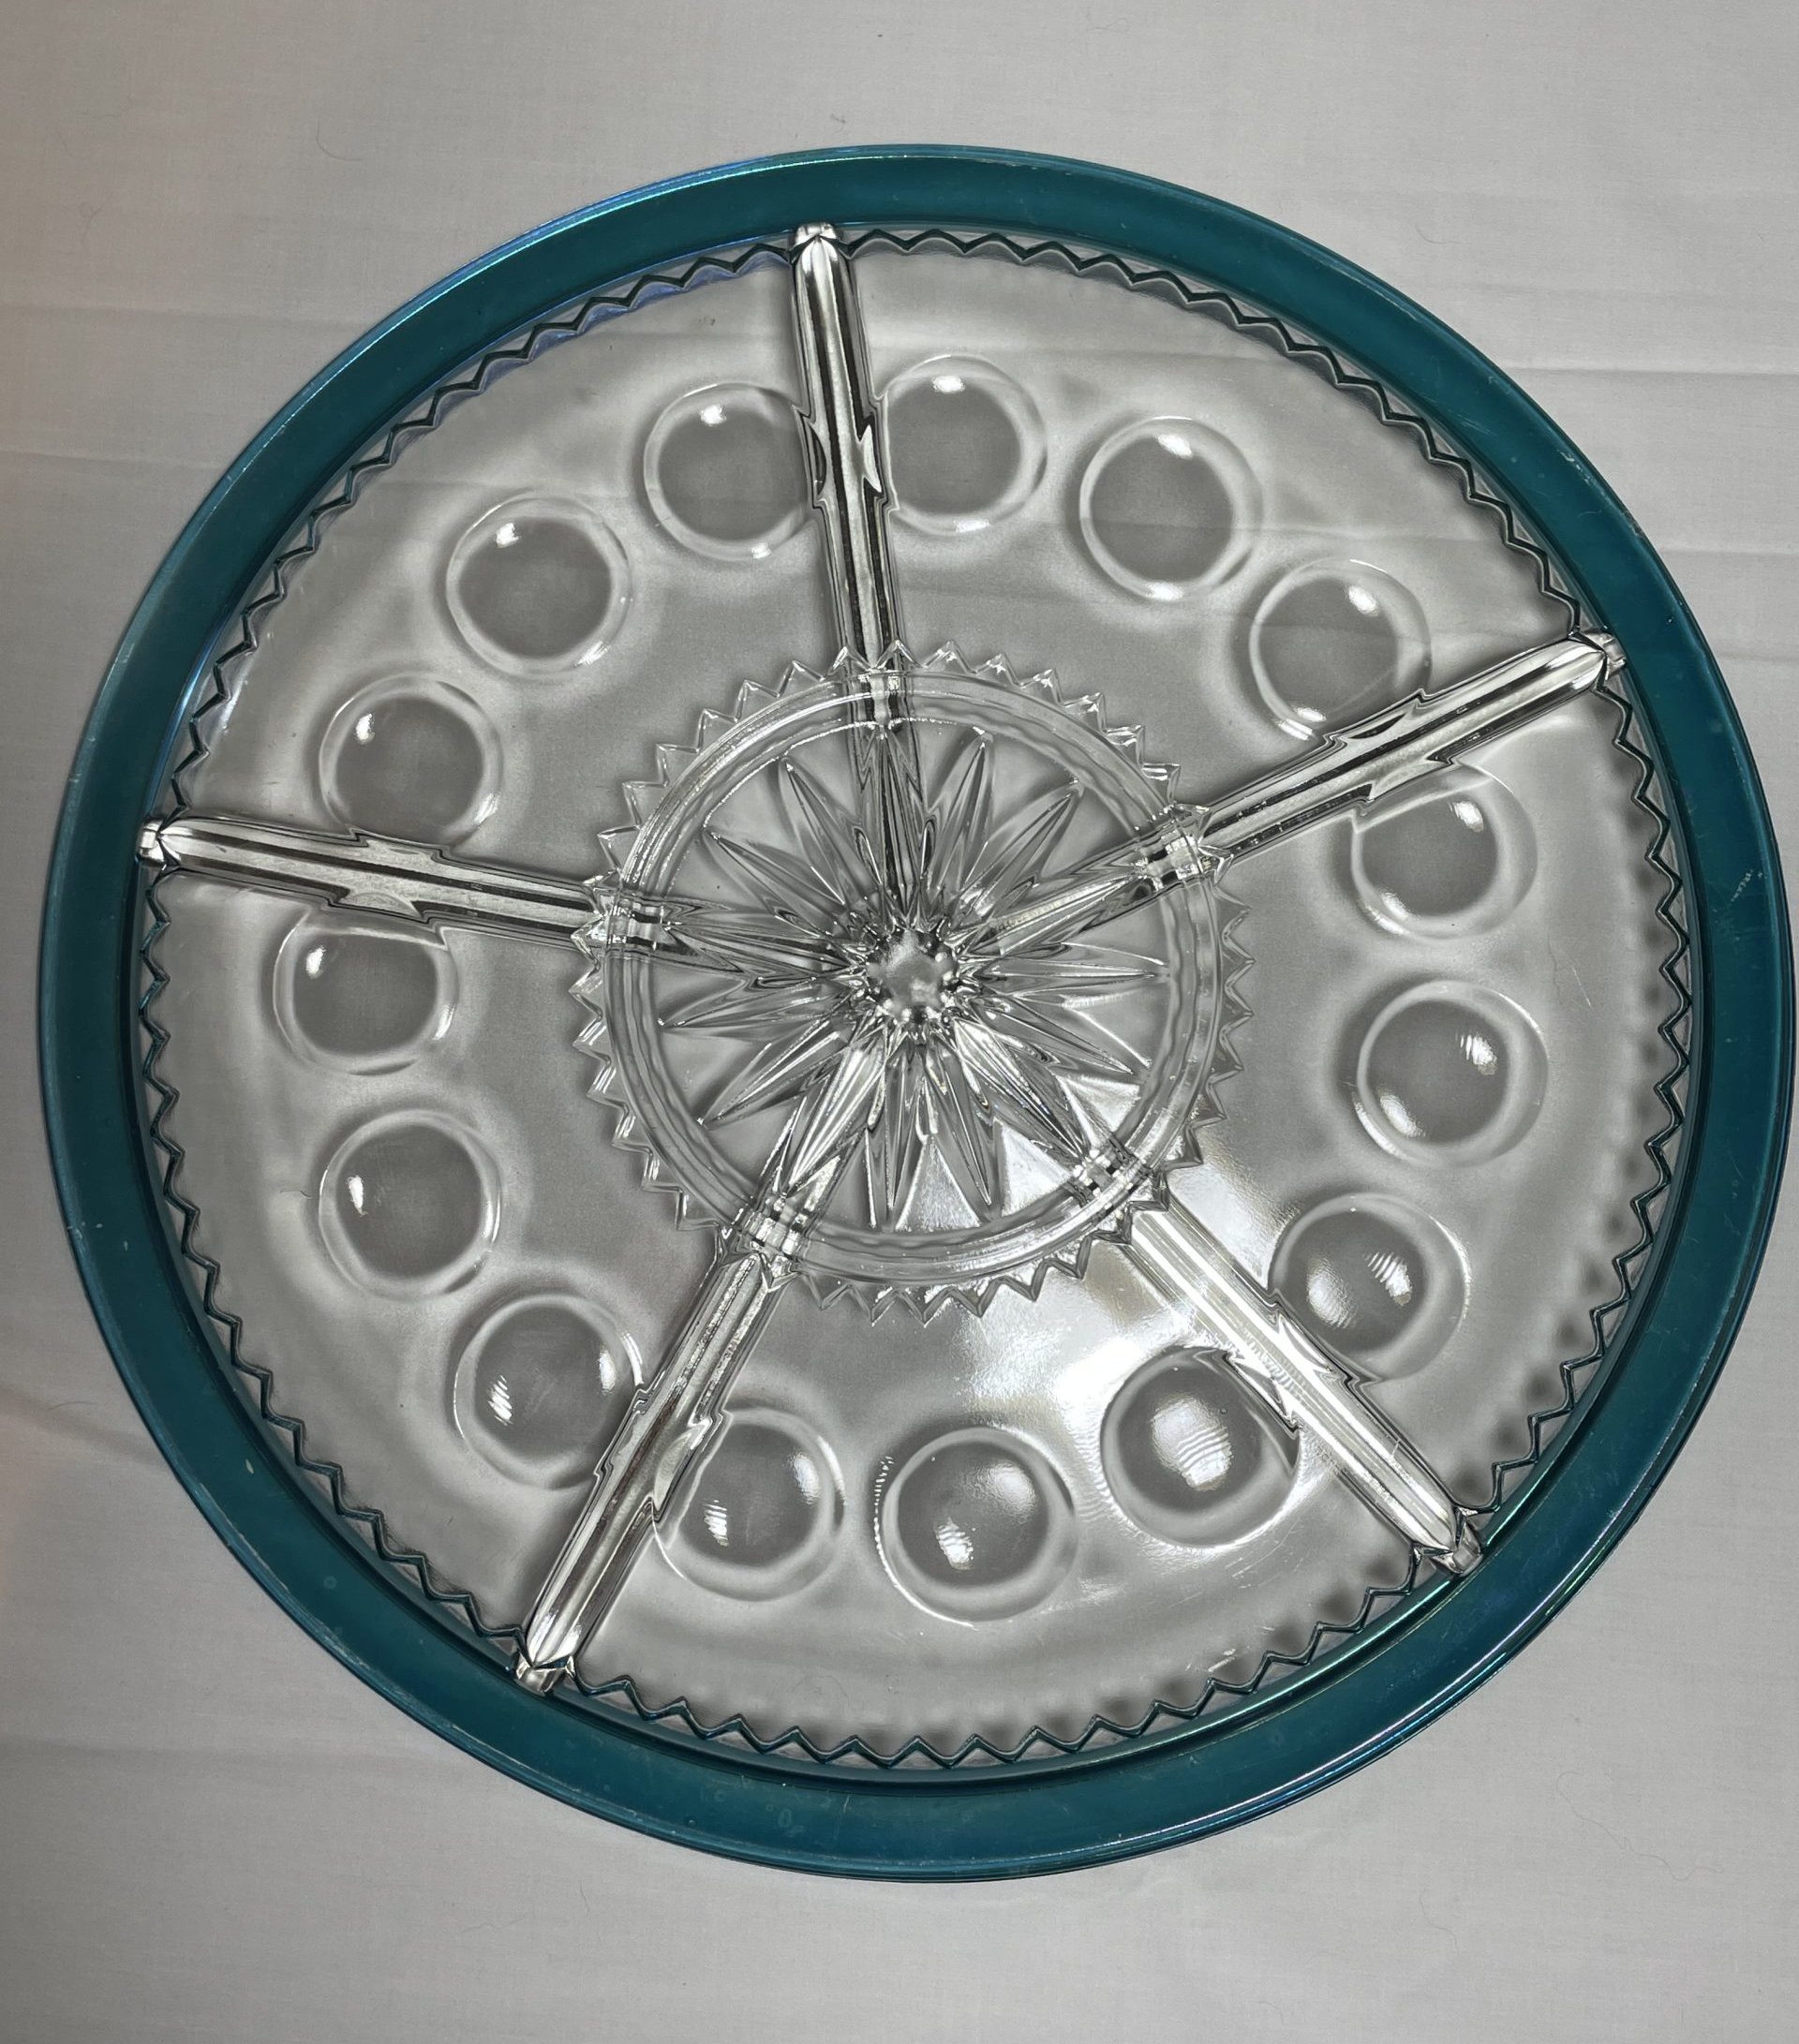 U.S./Tiffin Glass divided relish tray